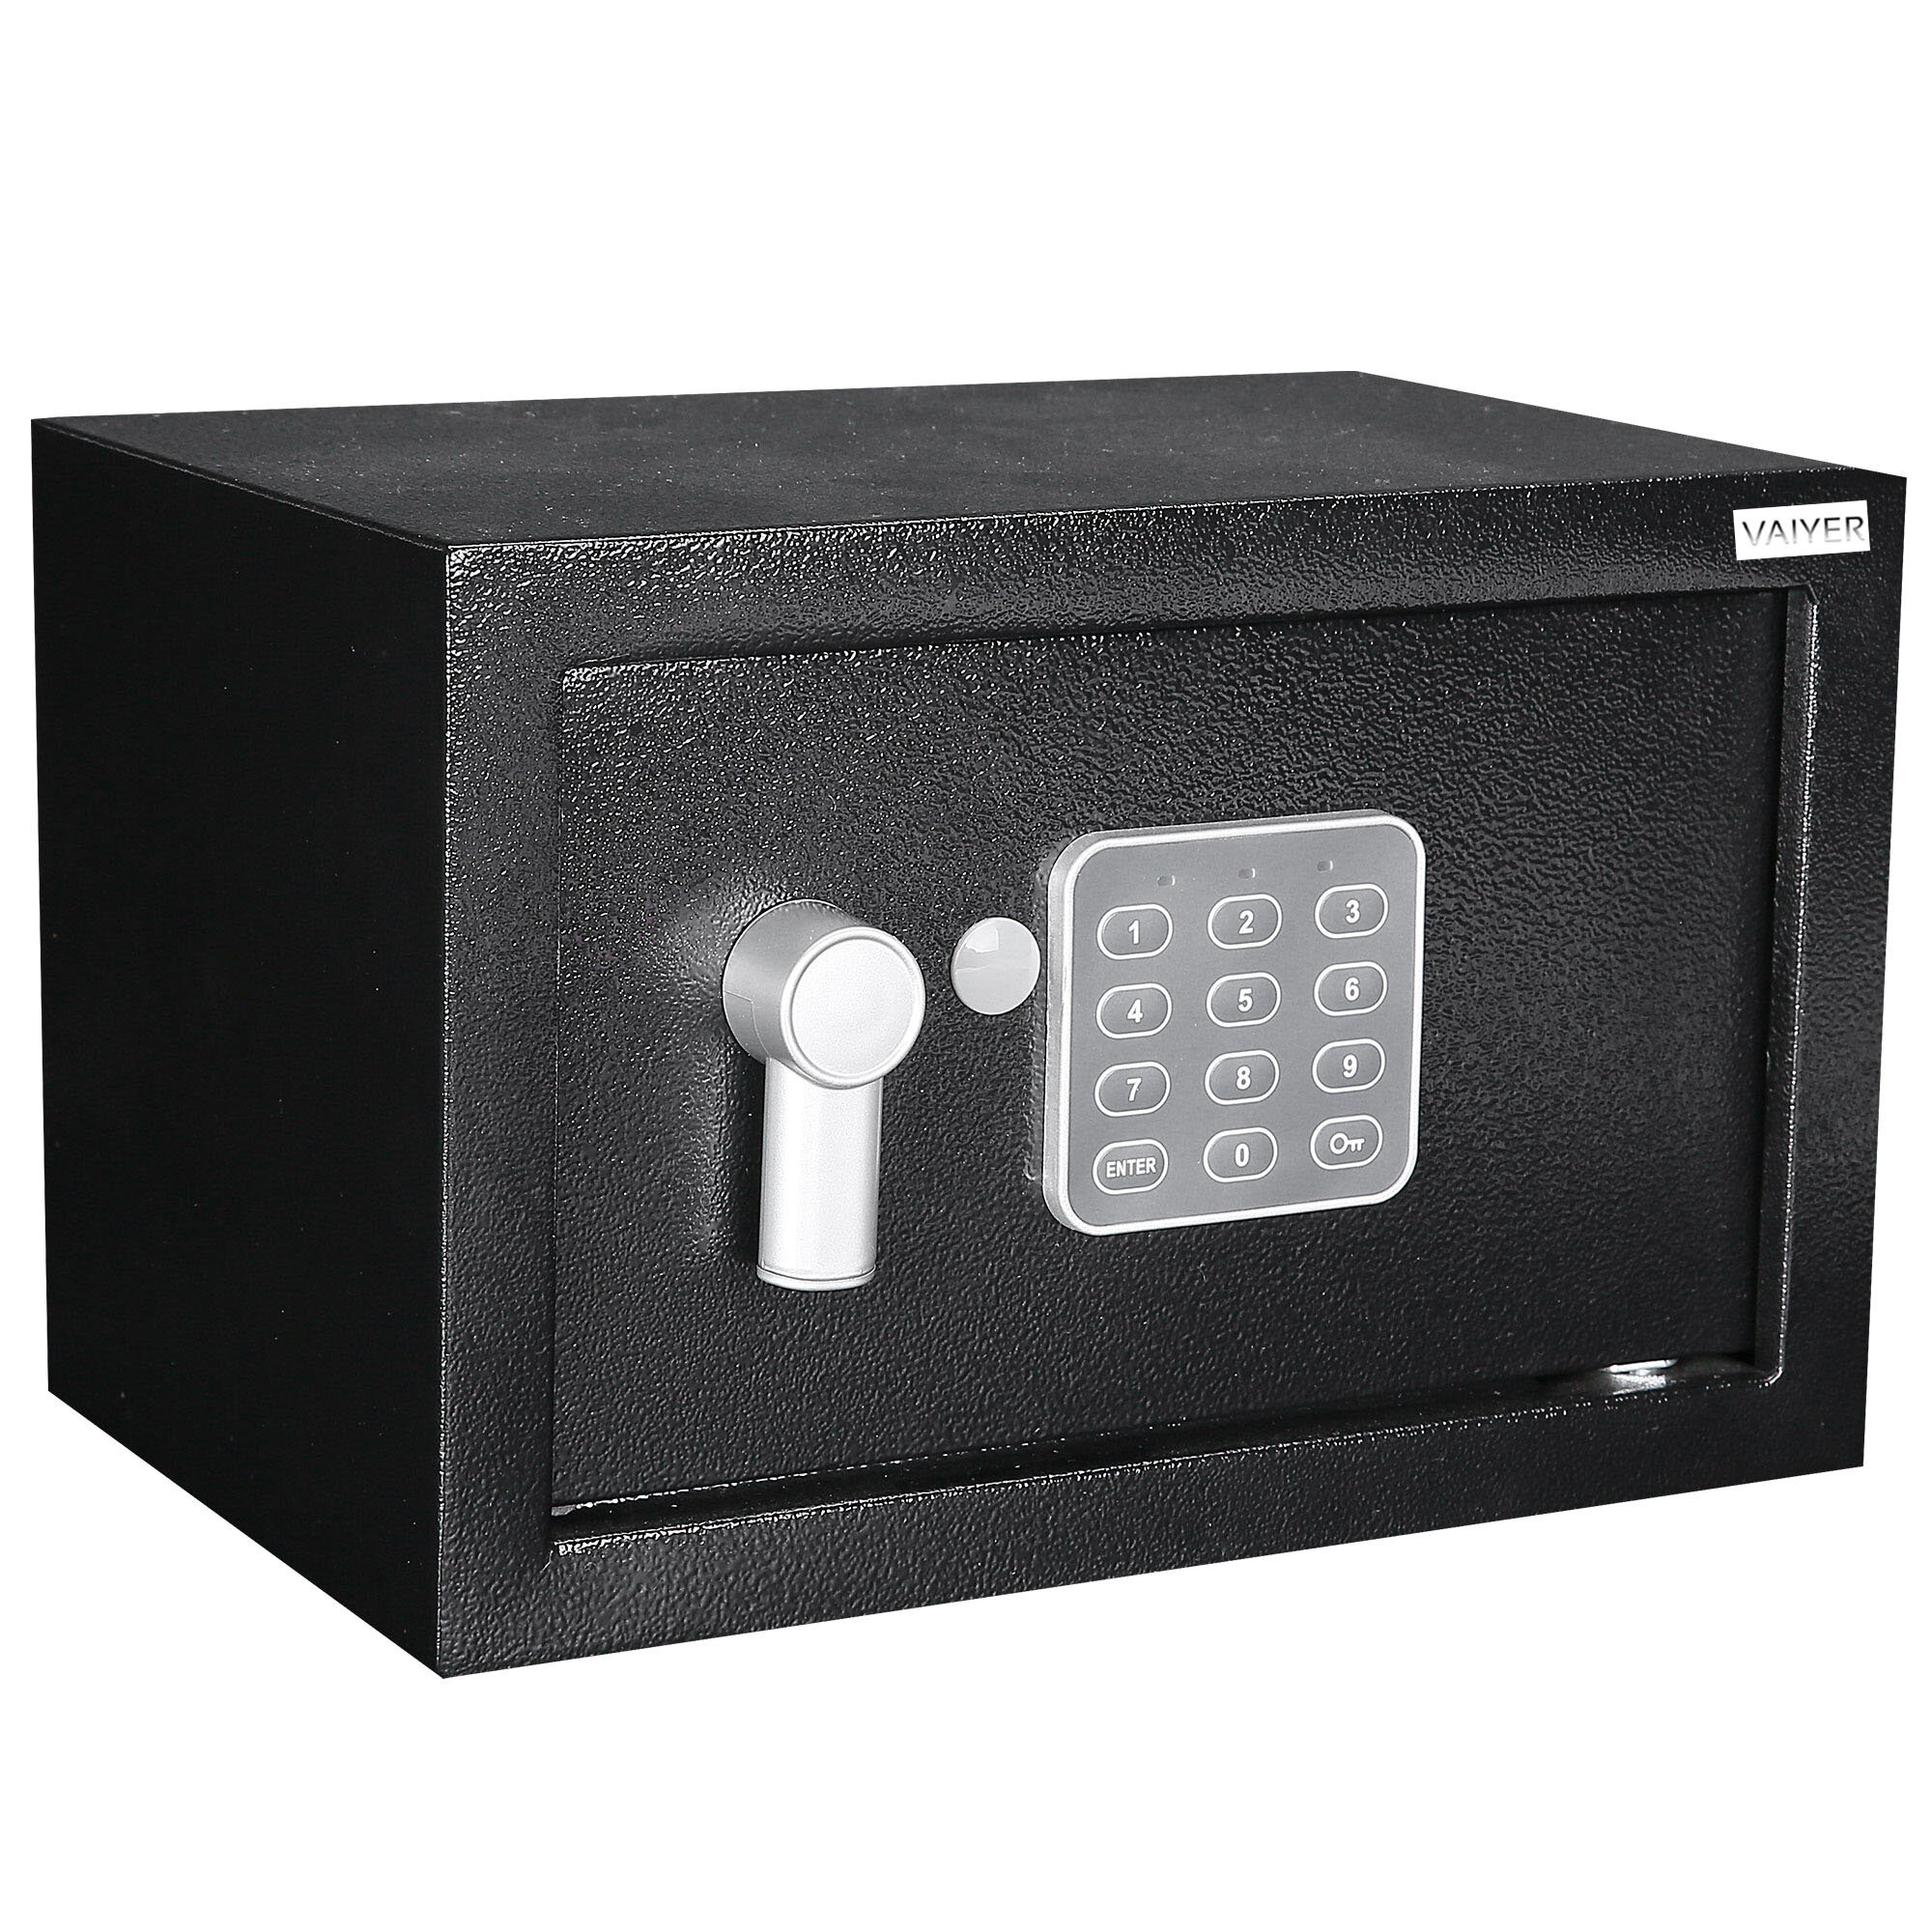 Hotel TIGERKING Personal Safe Security Digital Lock Box Key Combination Code Safe Box Steel Money Box Electronic Small Safes for Home Office